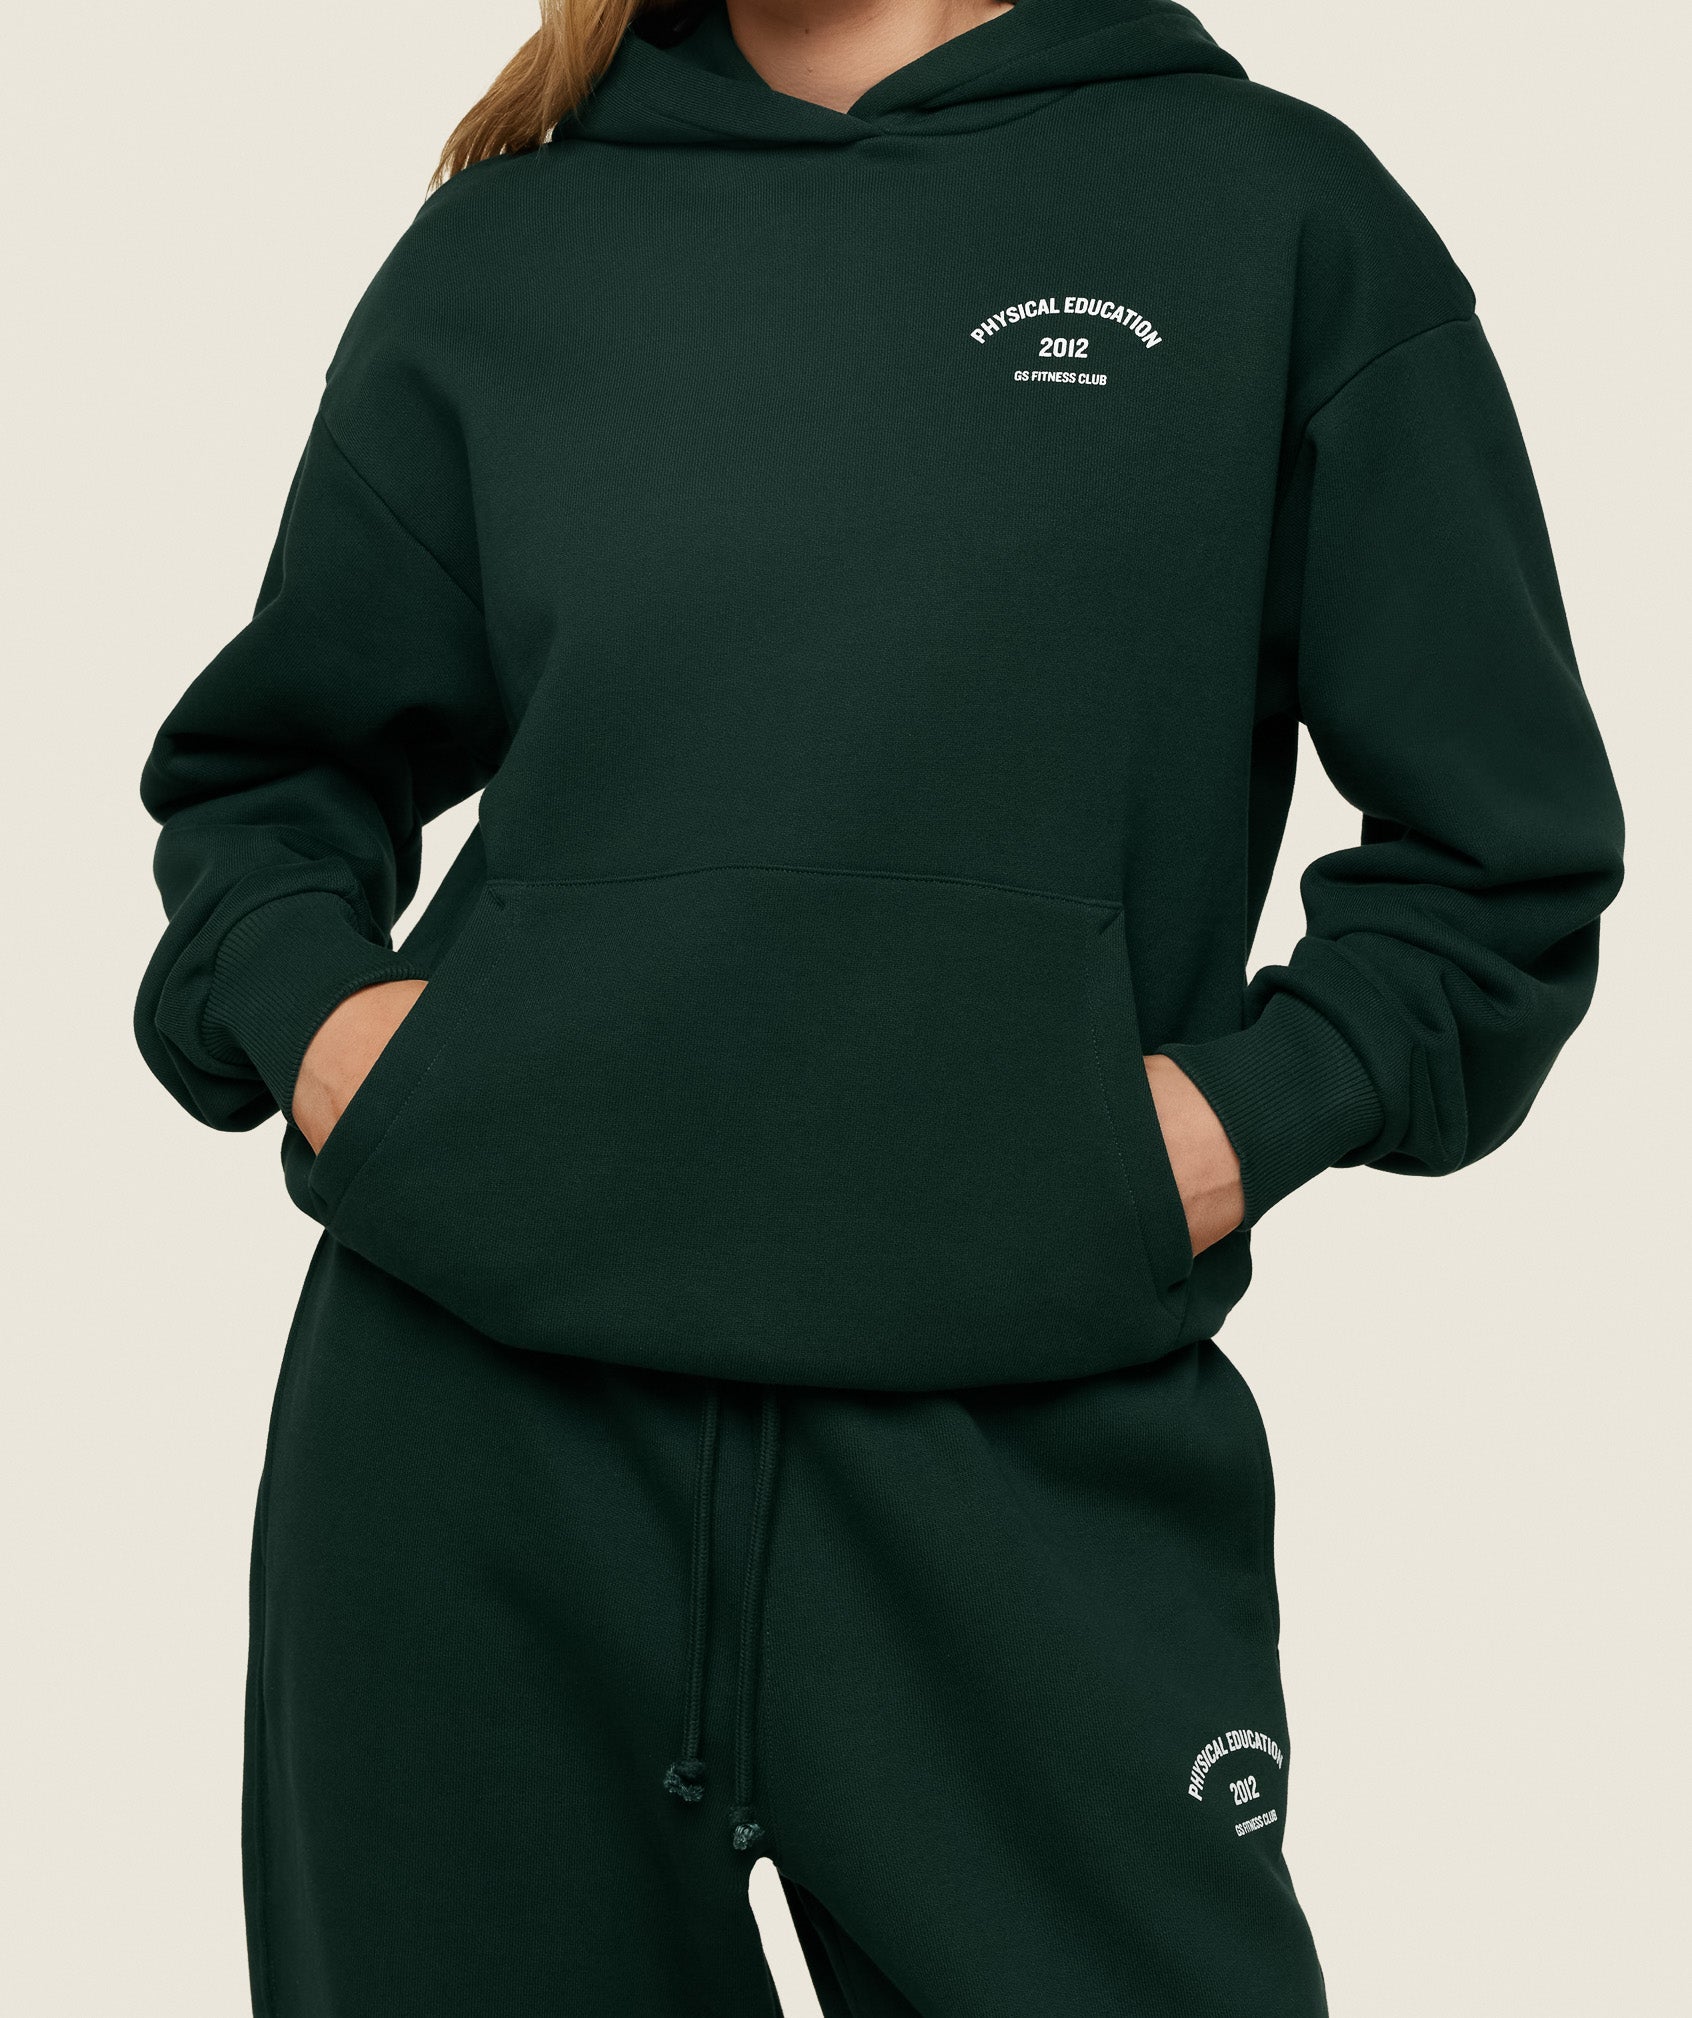 Phys Ed Graphic Hoodie in Green - view 3